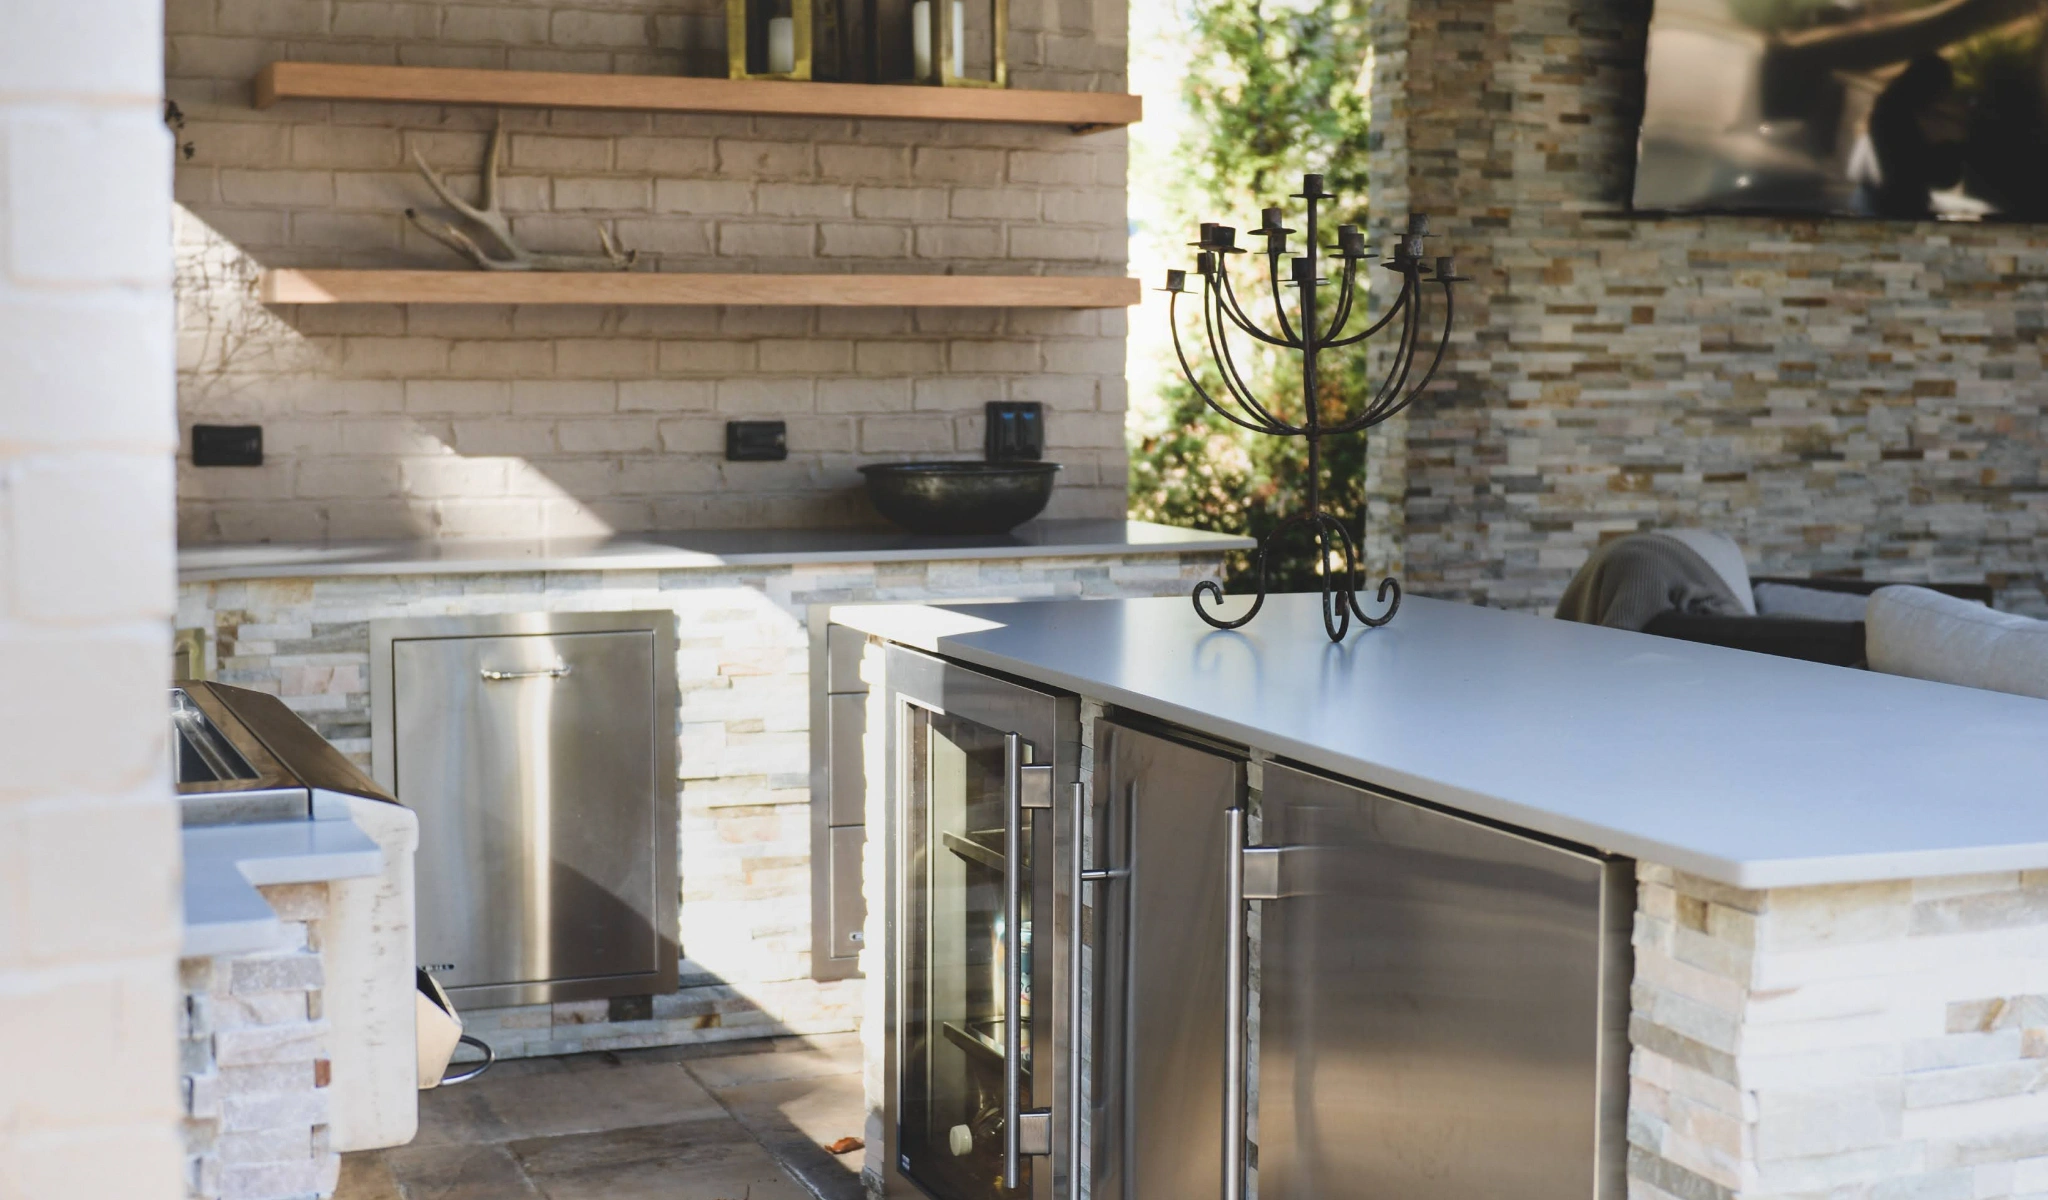 An outdoor kitchen with stainless steel appliances designed by a home designer.